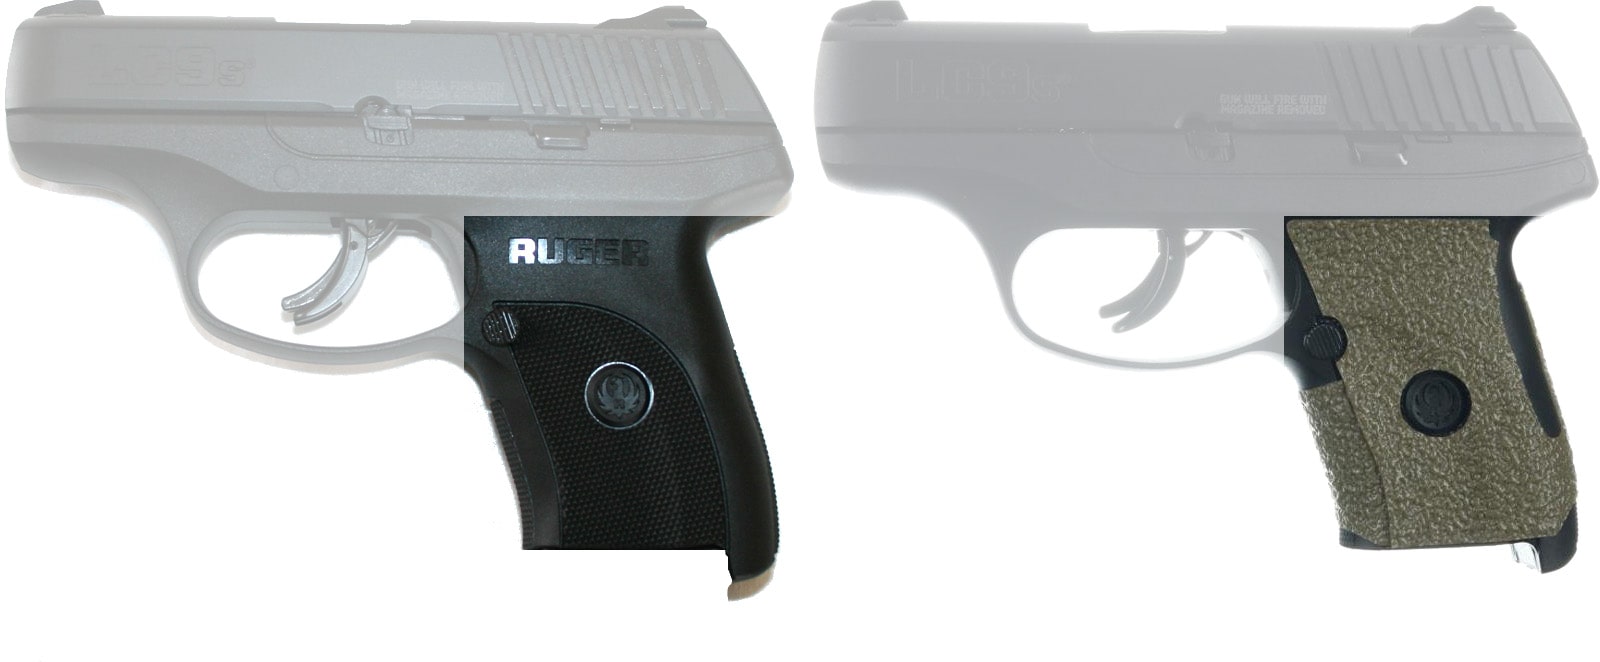 Ruger LC9 stock grips vs. Talon overgrips